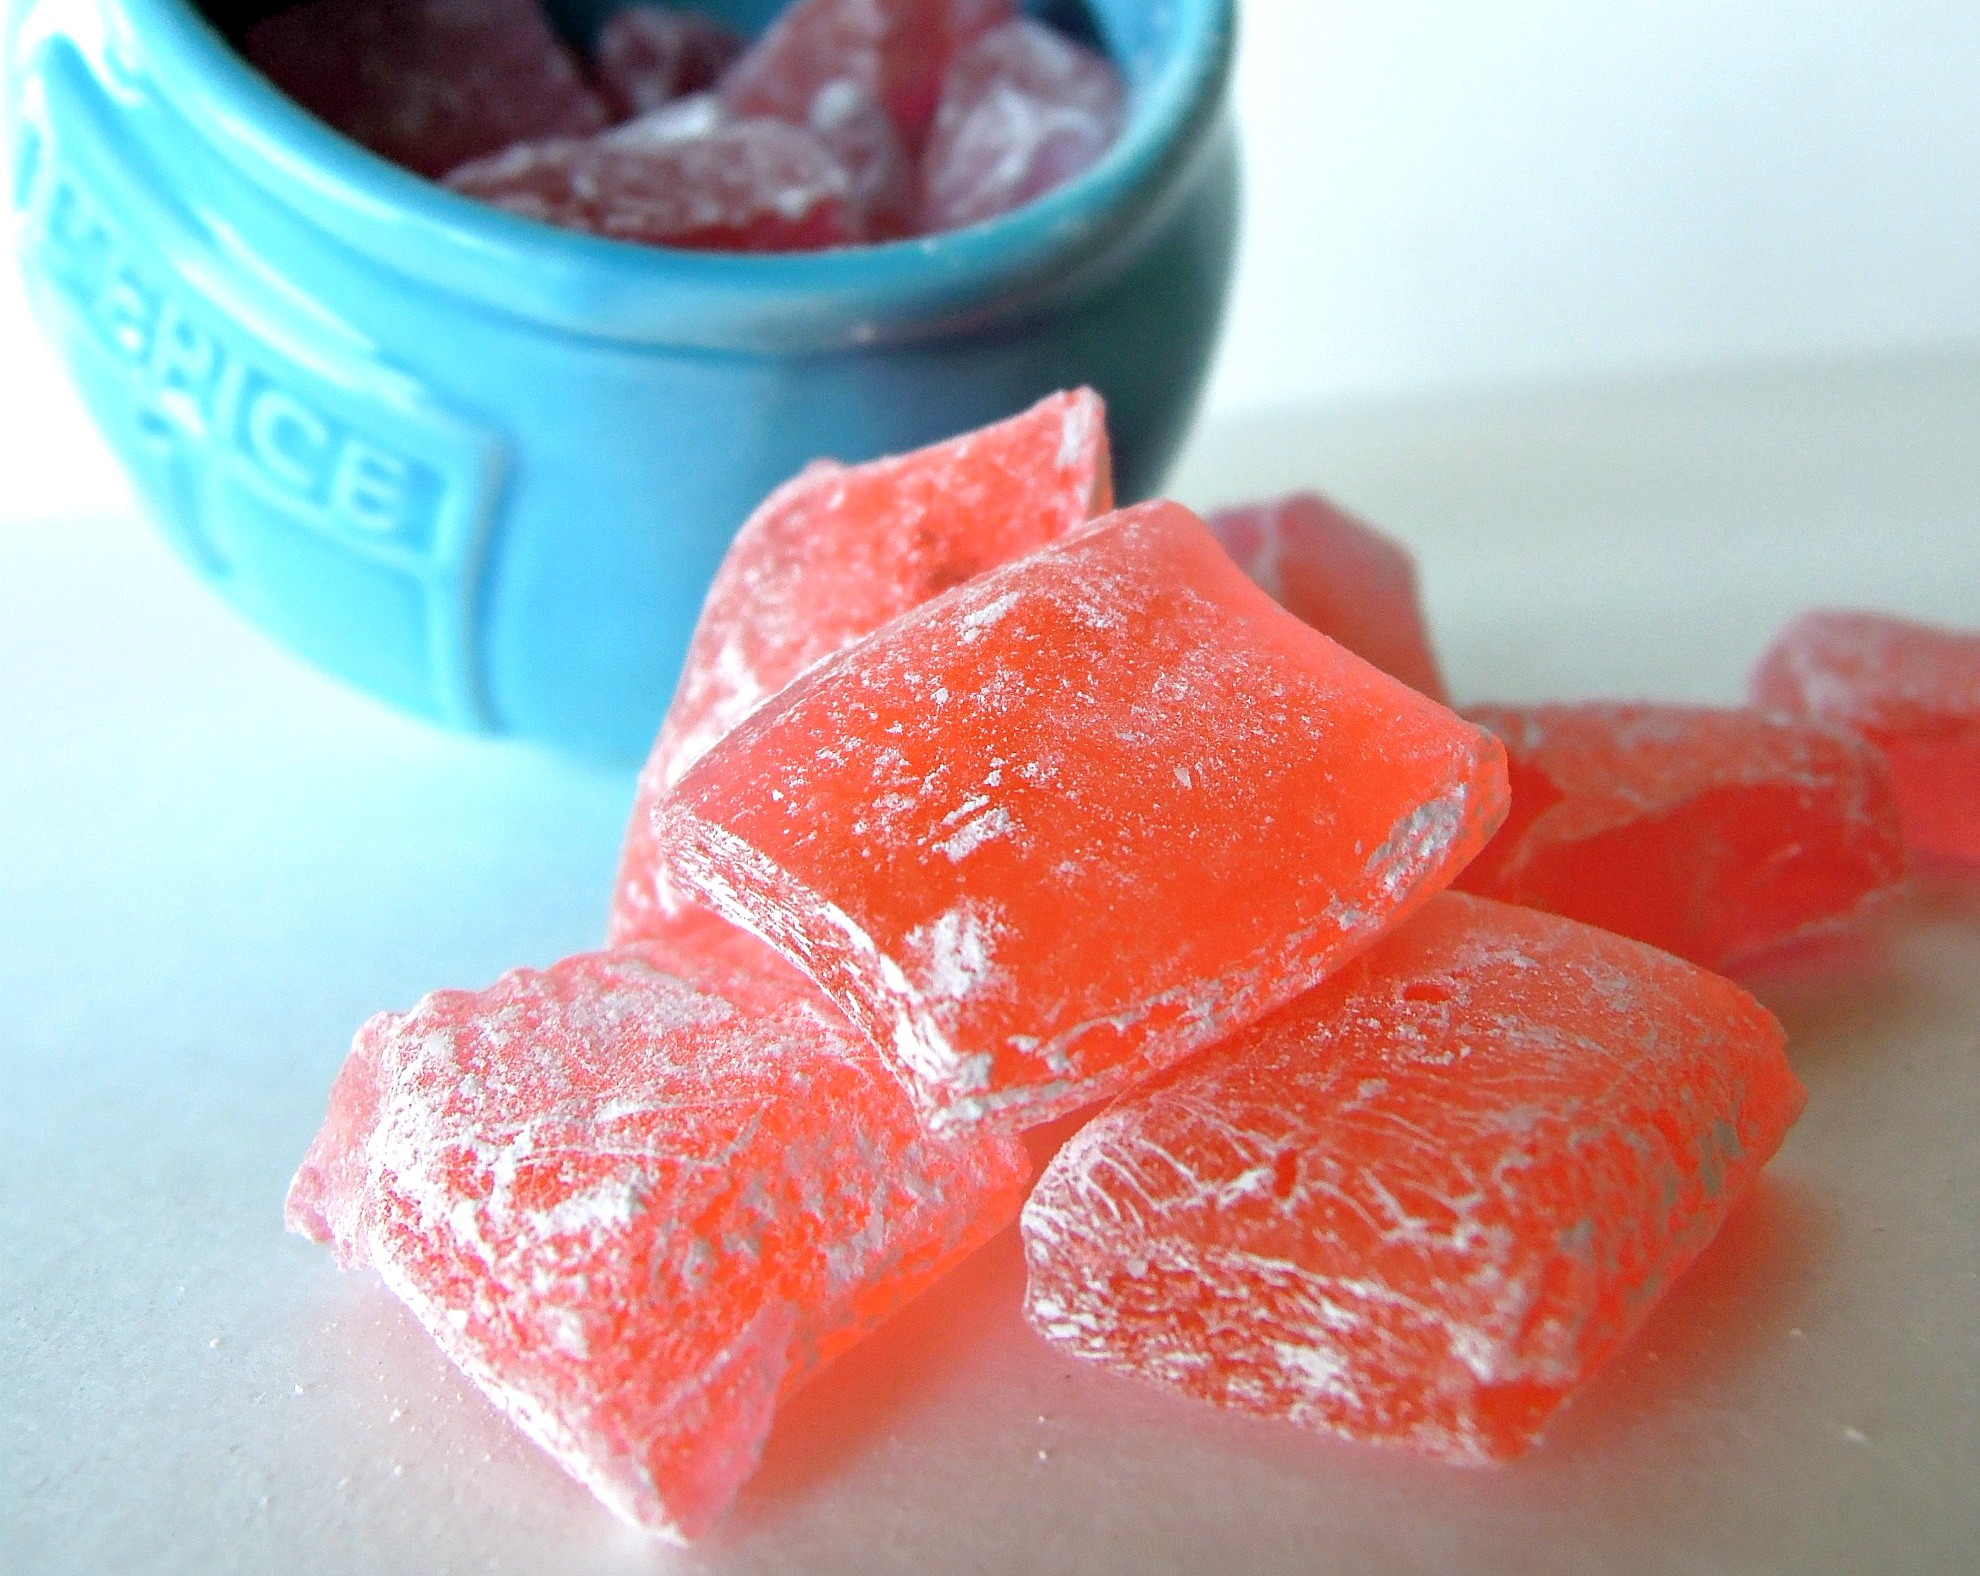 Homemade watermelon candies piled on top of each other